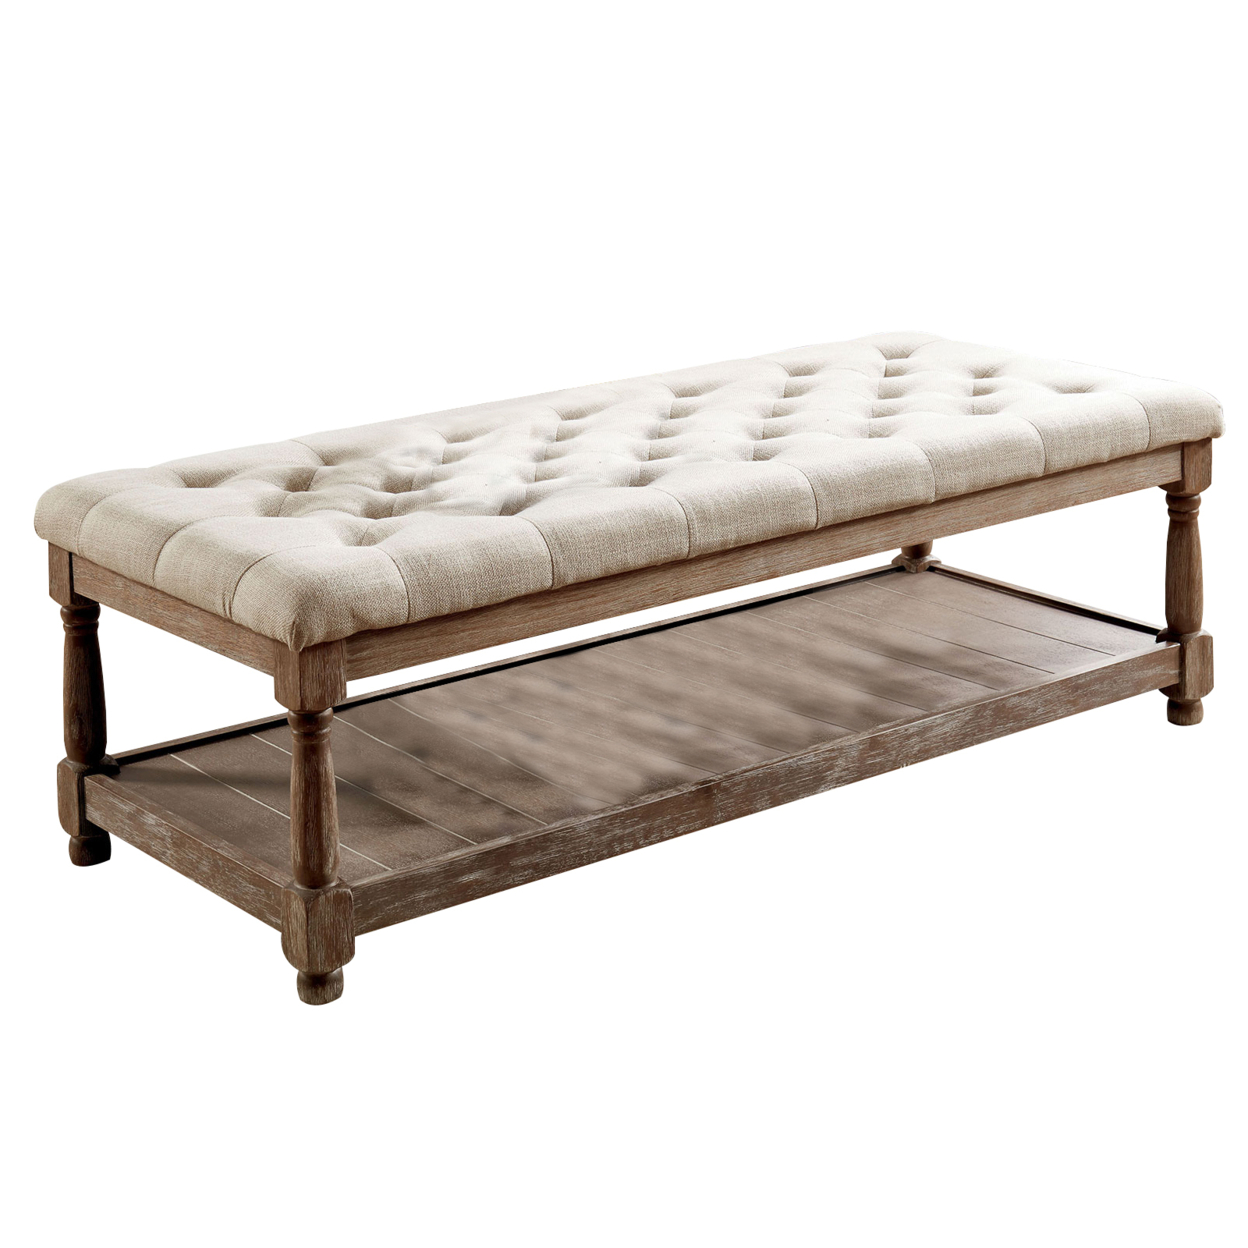 Button Tufted Fabric Upholstered Bench With Bottom Shelf, Beige And Brown- Saltoro Sherpi